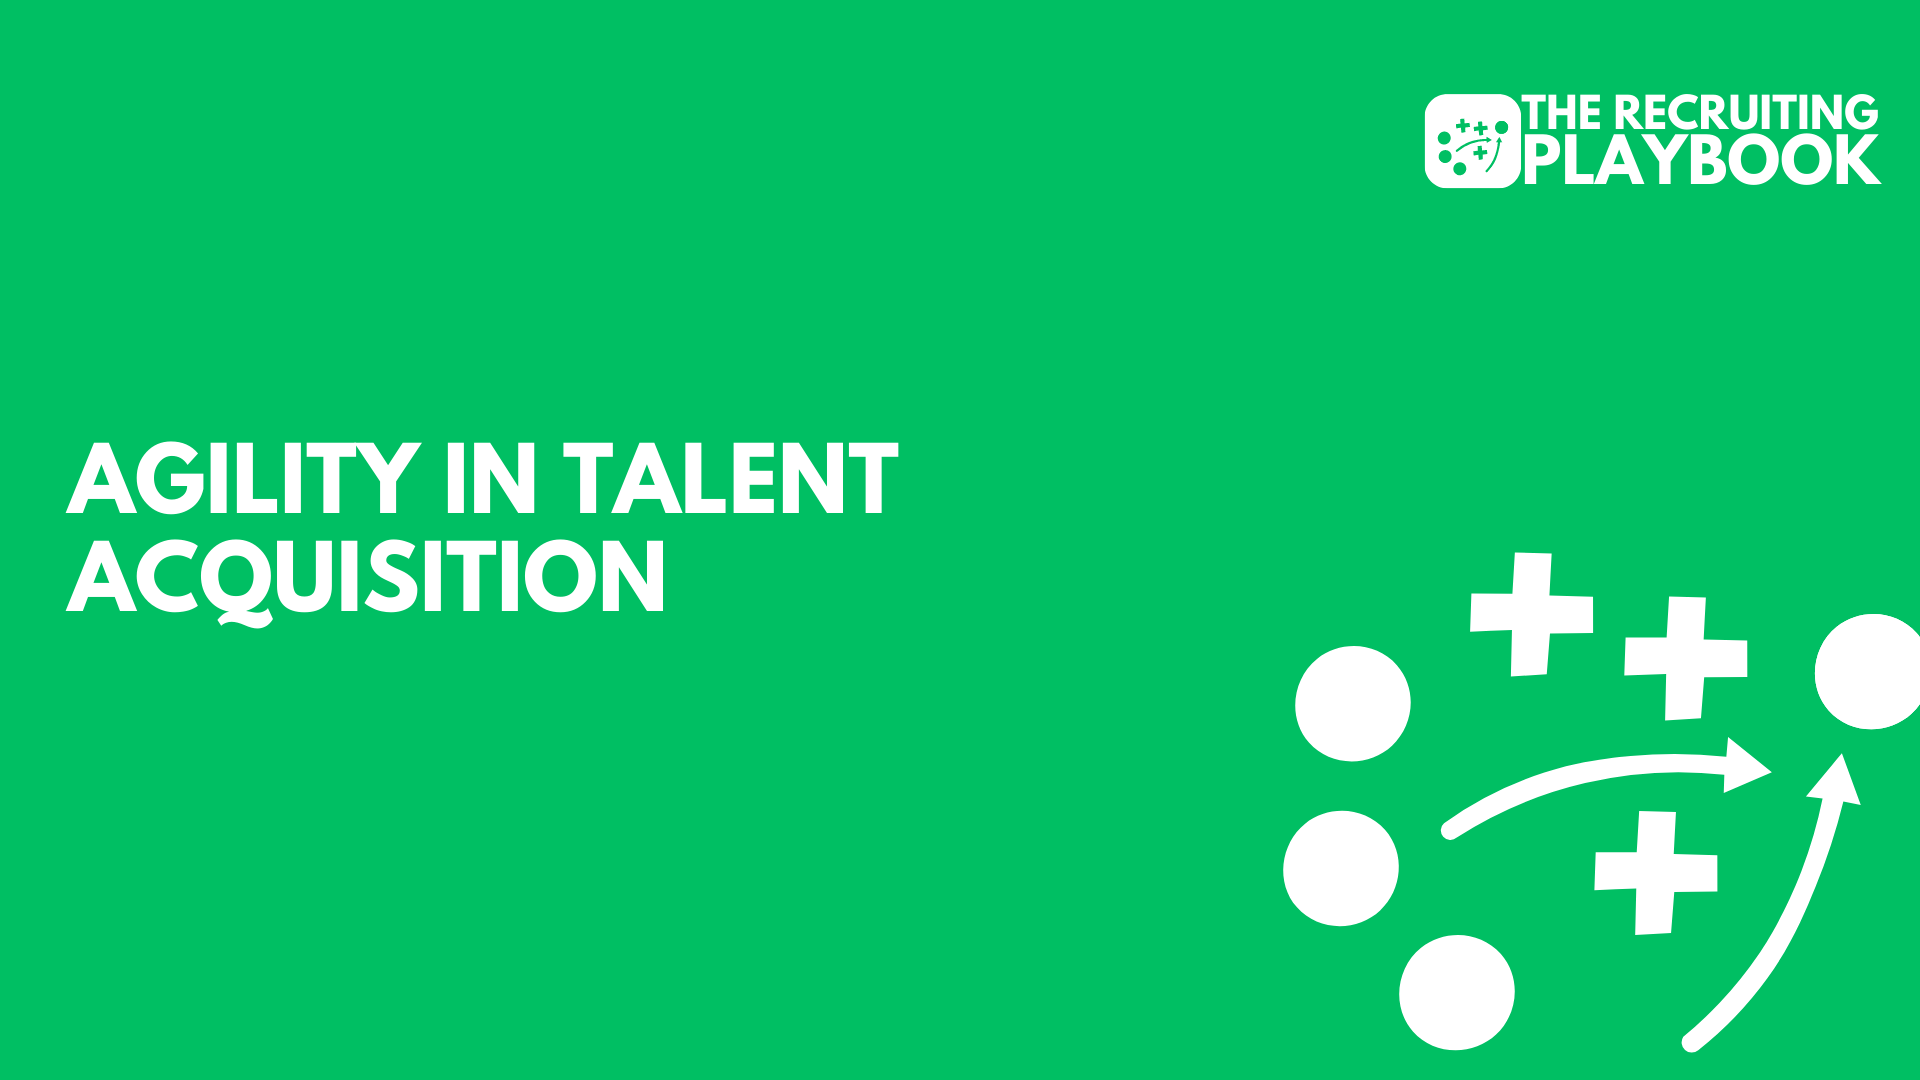 Agility in Talent Acquisition